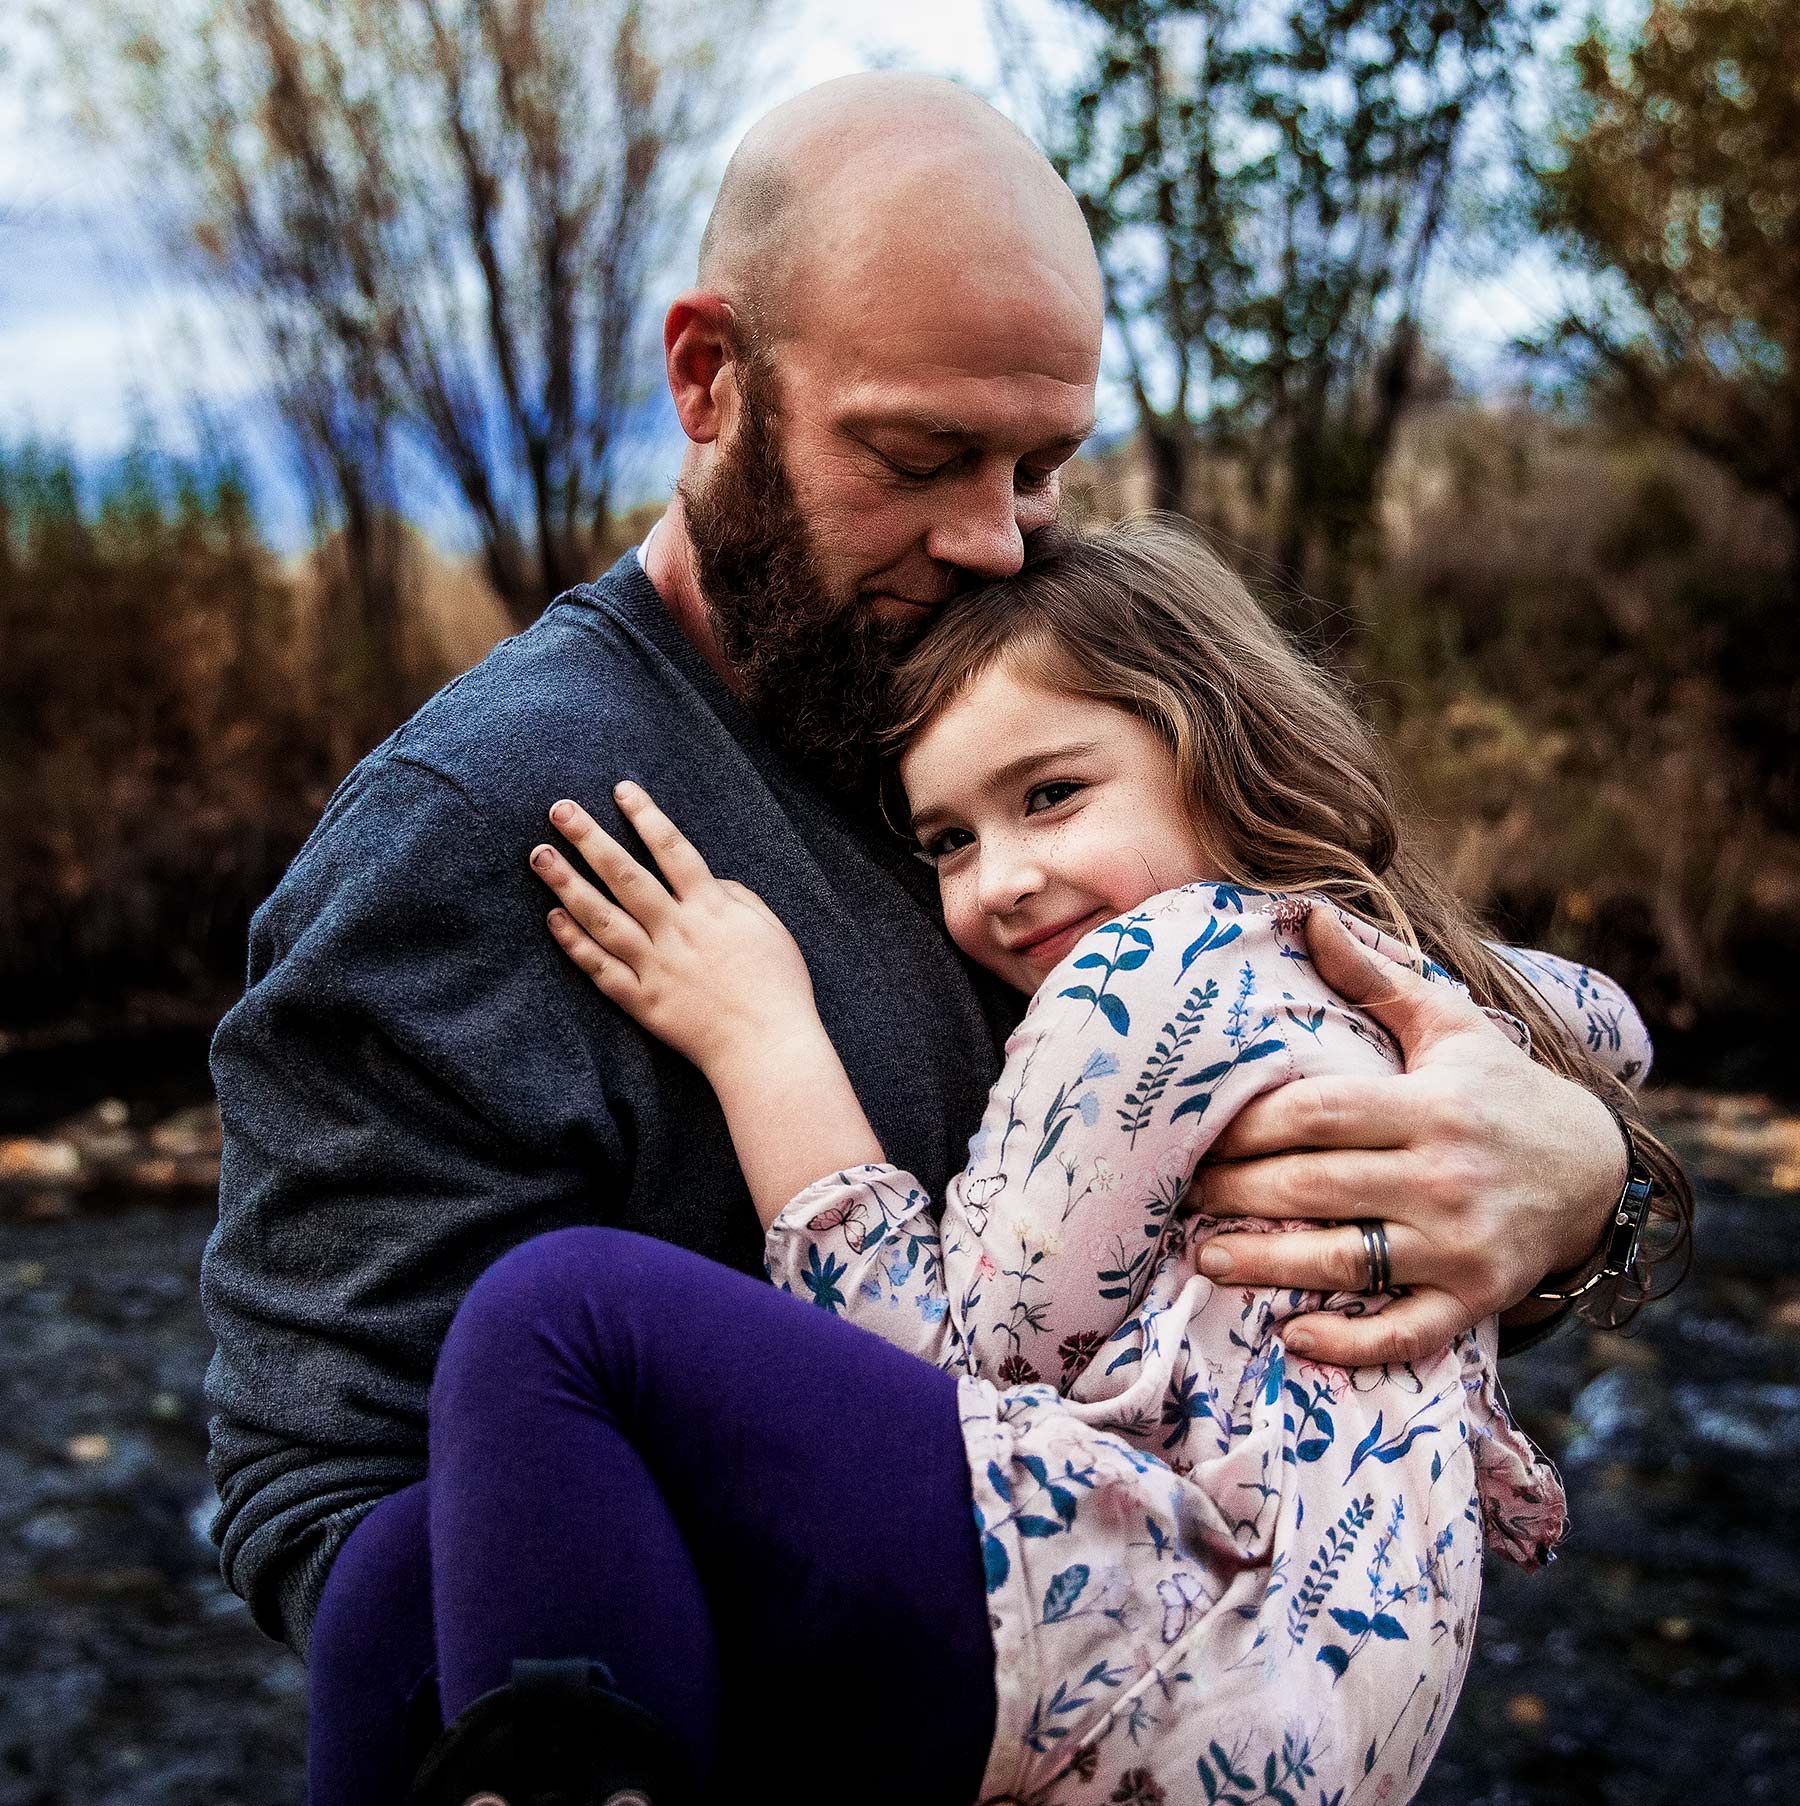 boise-best-photographer-dad-with-beard-and-bald-holding-daughter-with-curly-hair-and-pink-top-smiling-and-hugging-daddy